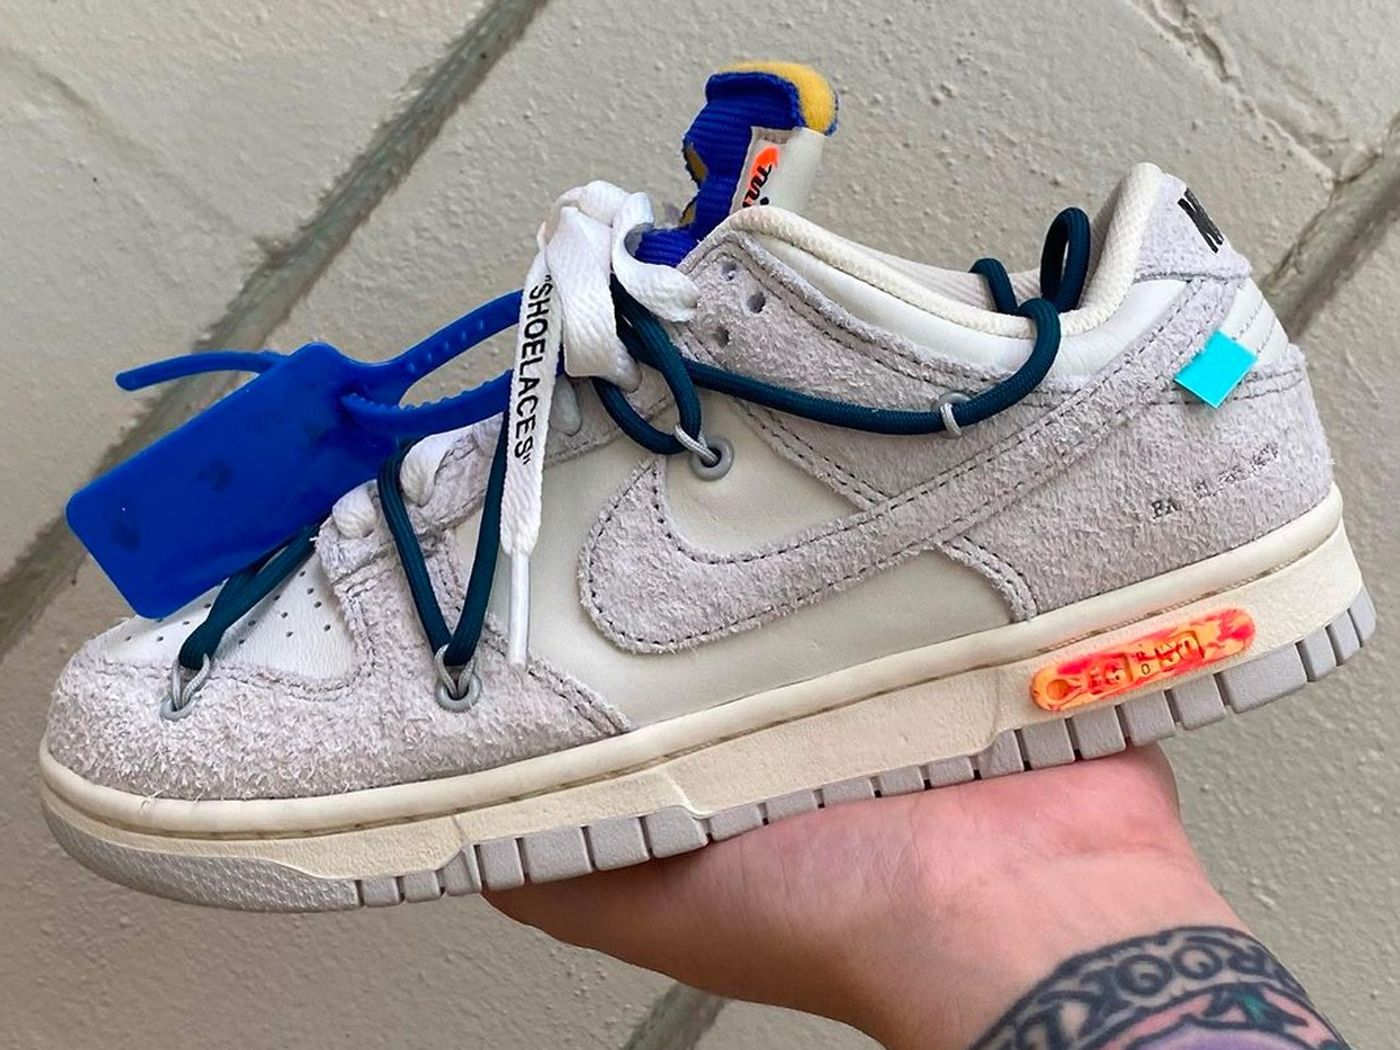 Off-White x Nike Dunk Low 01 of 50 Dropping Next Month